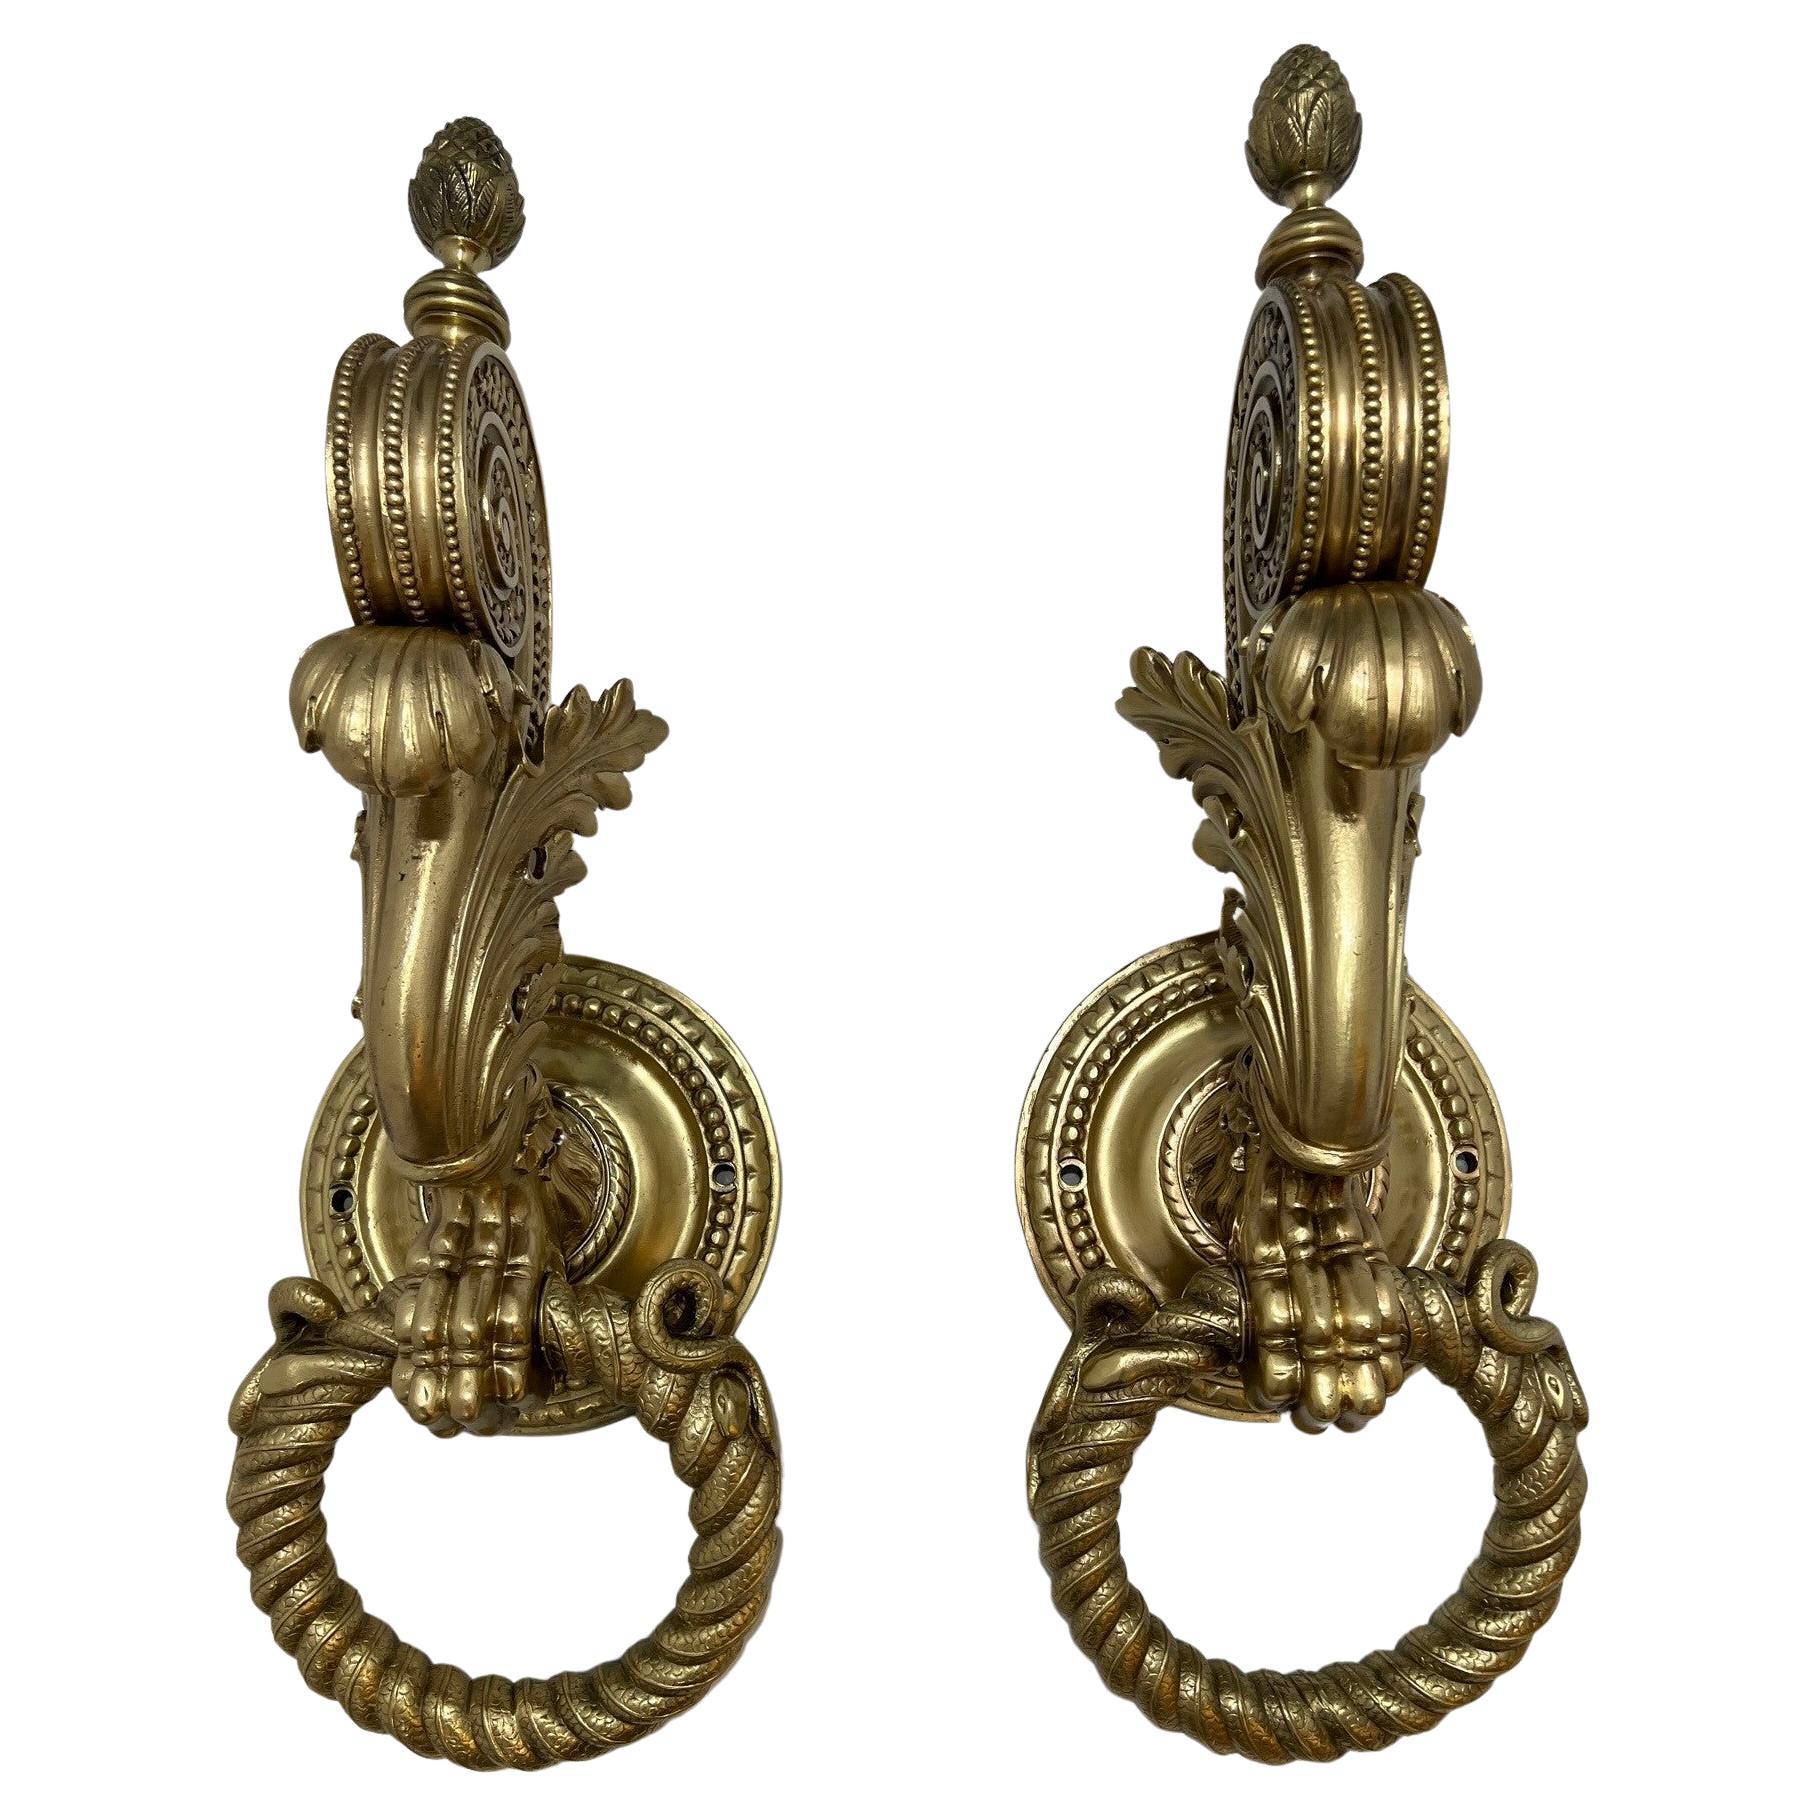 Mid 19th Century Pair of Monumental Antique Architectural Bronze Door Knockers   For Sale